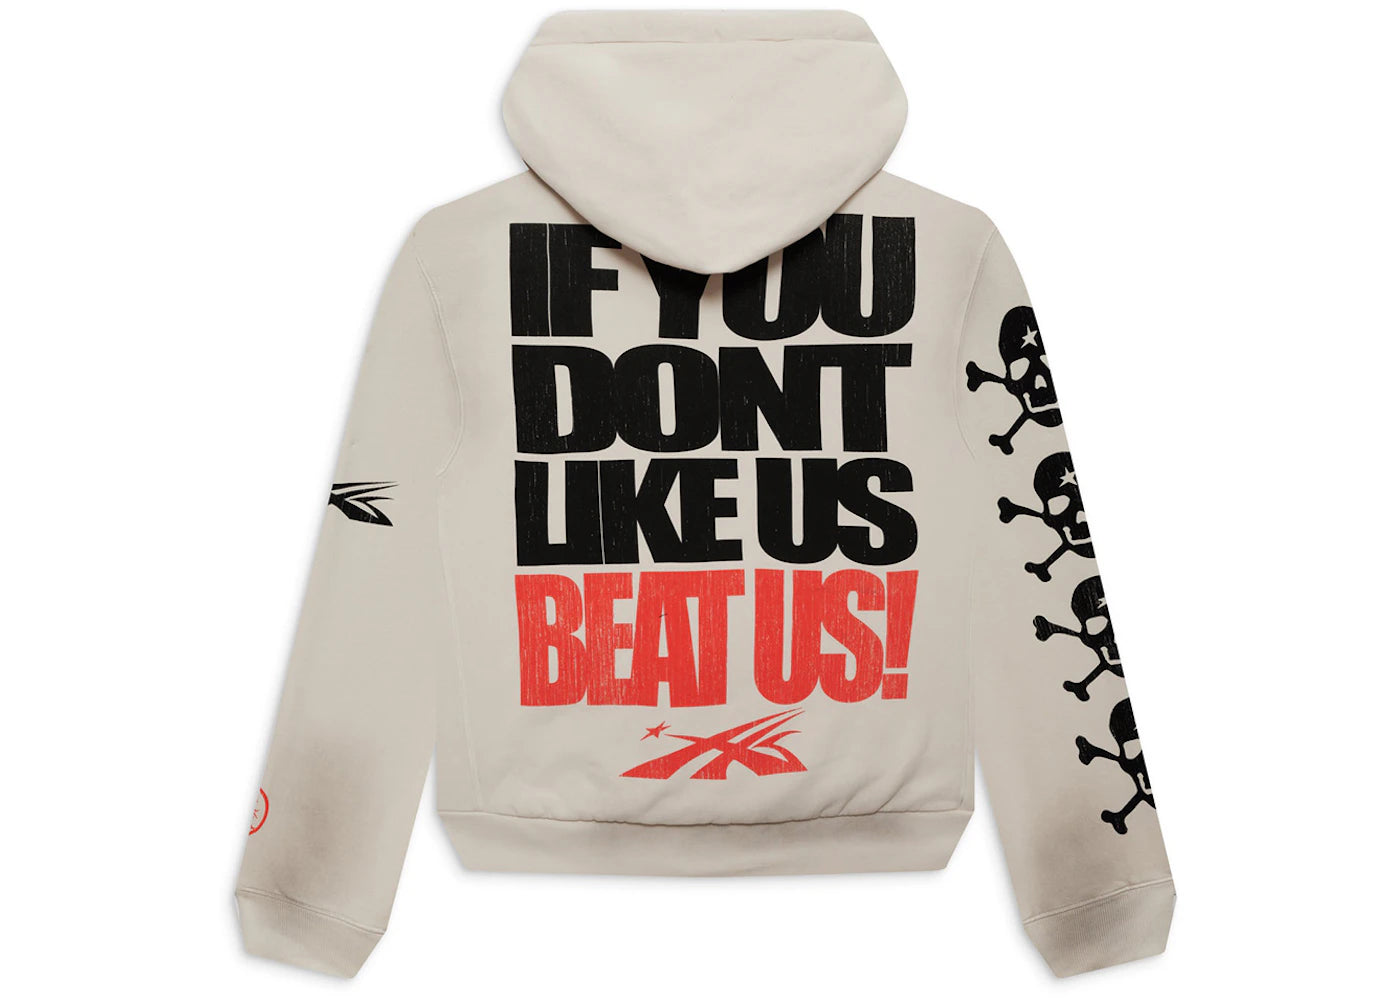 Hellstar Sports If You Don't Like Us Beat Us Hoodie White